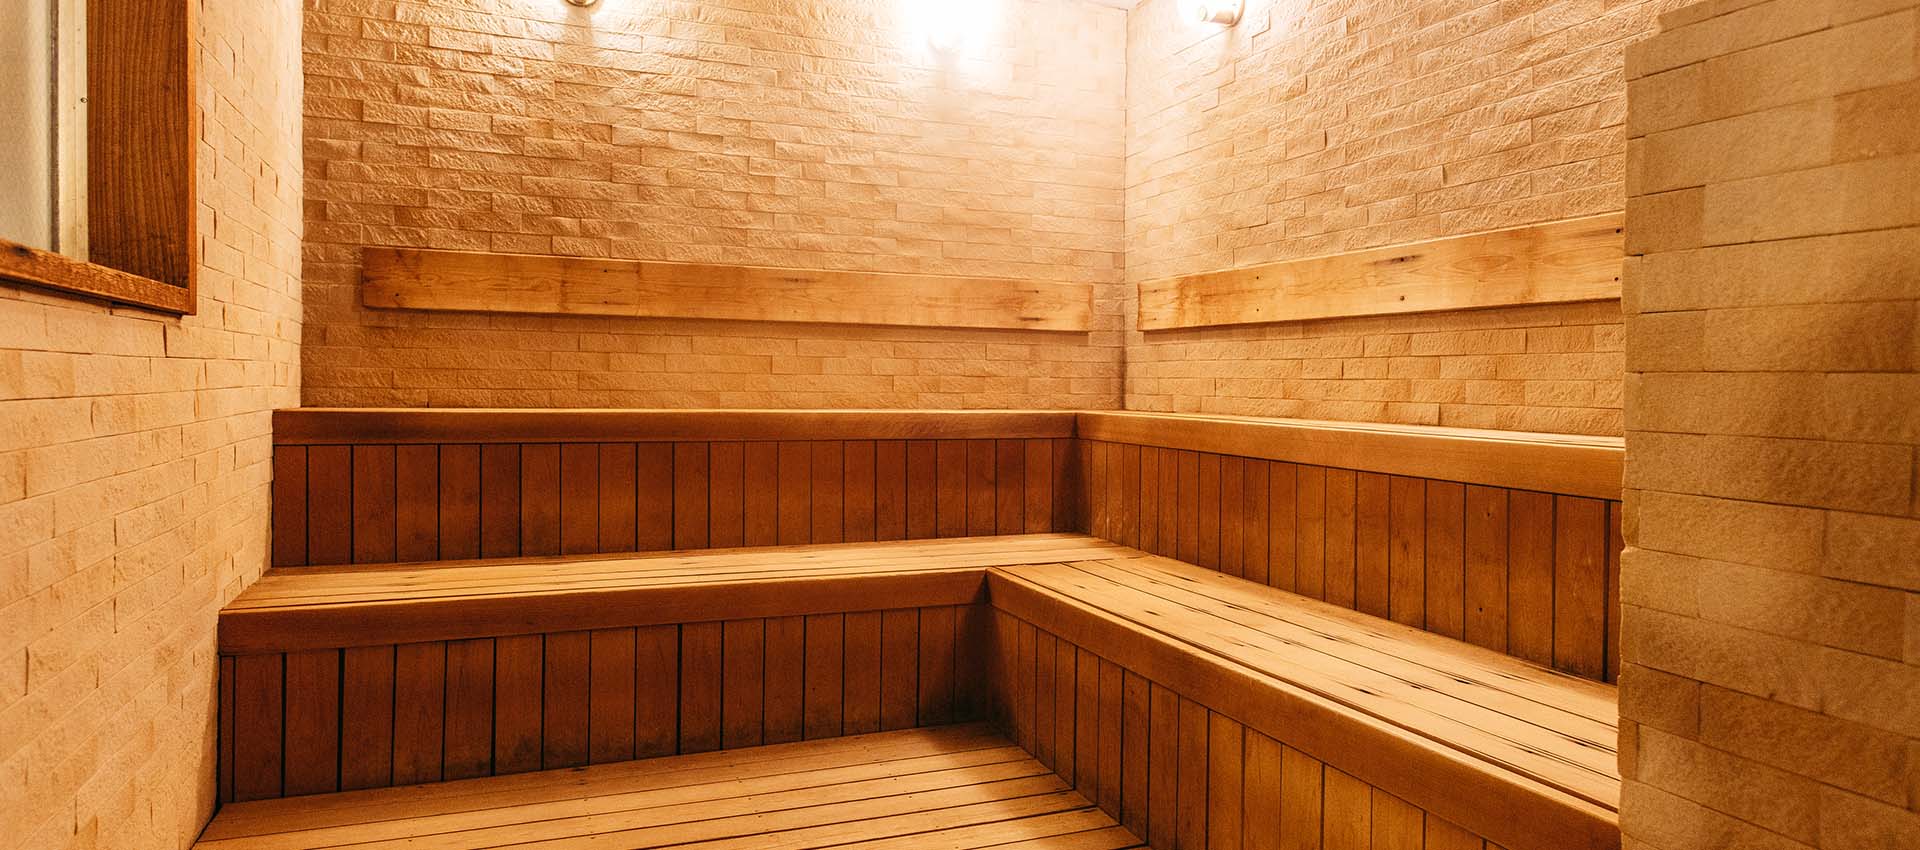 Enjoy a "Toto" experience with a sauna and outdoor air bath.